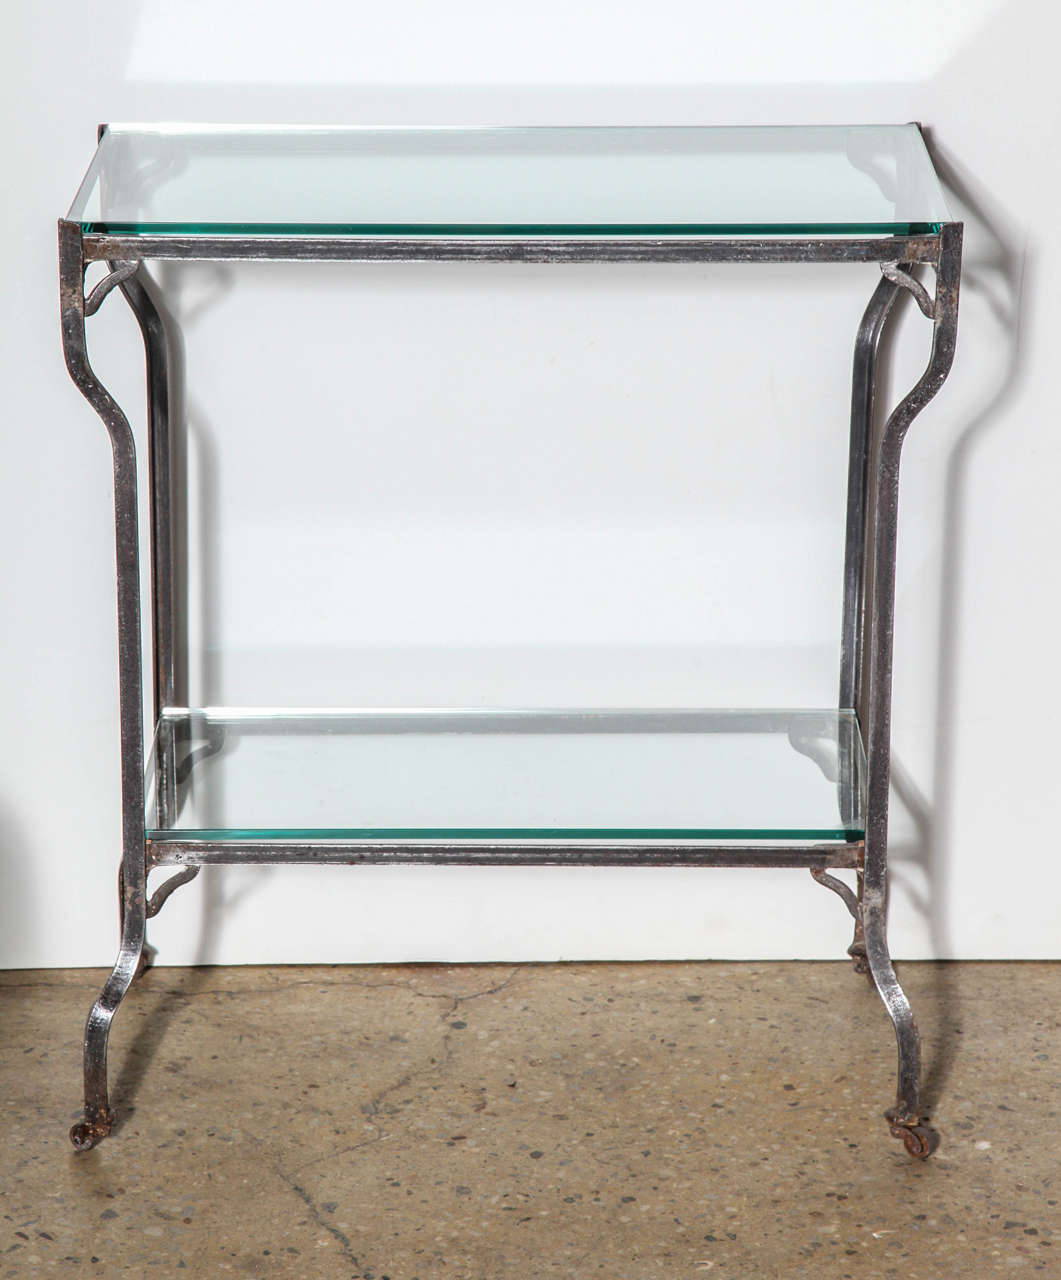 Late 19th Century American Industrial Rolling Dry Bar, Serving Cart with glass shelves. Featuring a steel framework with steel rod and steel bracket detail, two new 3/8 glass shelves, larger top glass shelf, cabriole legs on casters. 20H space